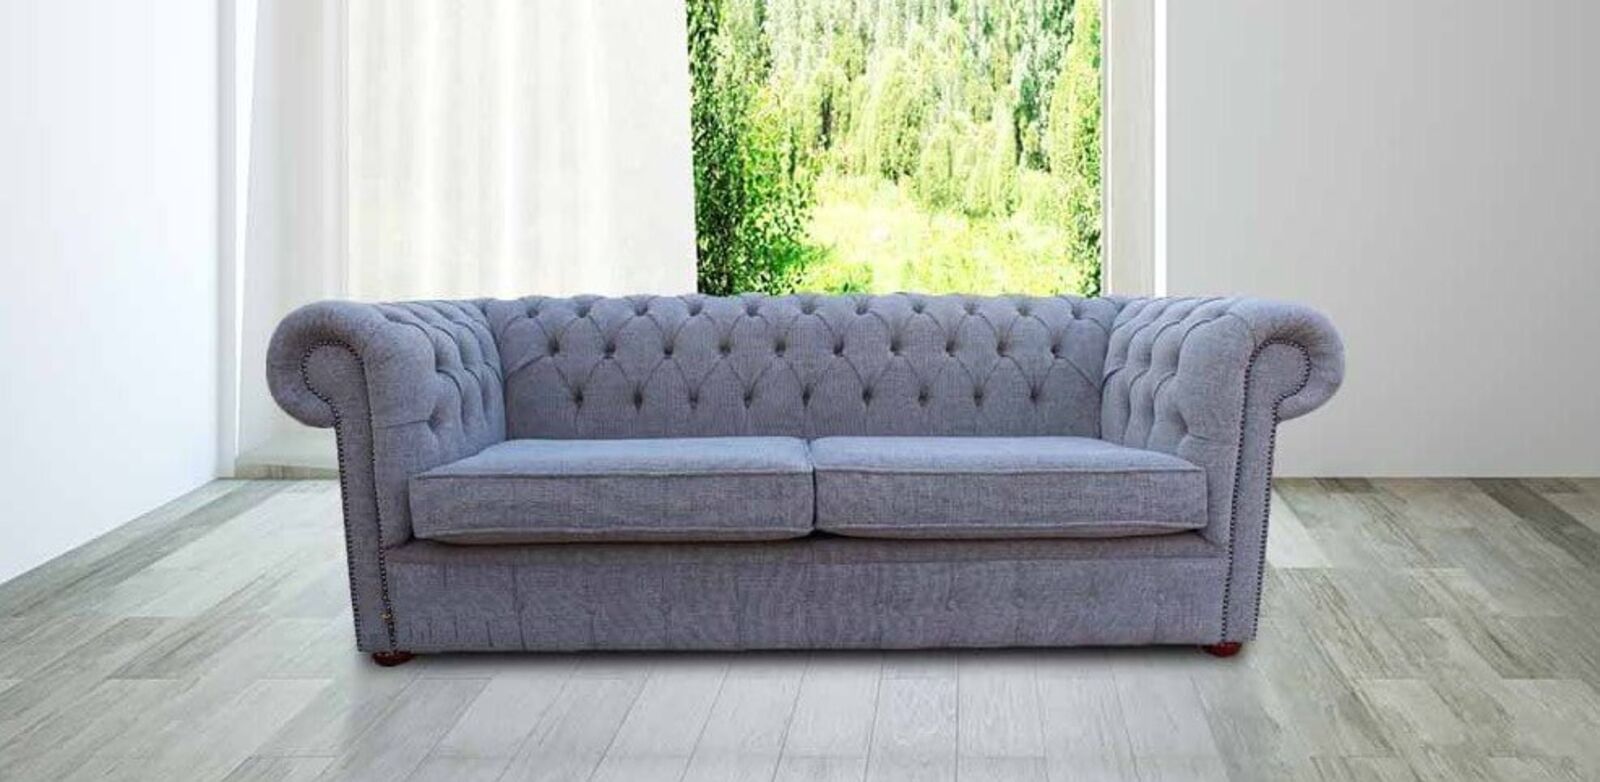 Product photograph of Chesterfield 3 Seater Sofa Settee Harley Slate Grey Fabric Offer 2 Cushion Style from Designer Sofas 4U